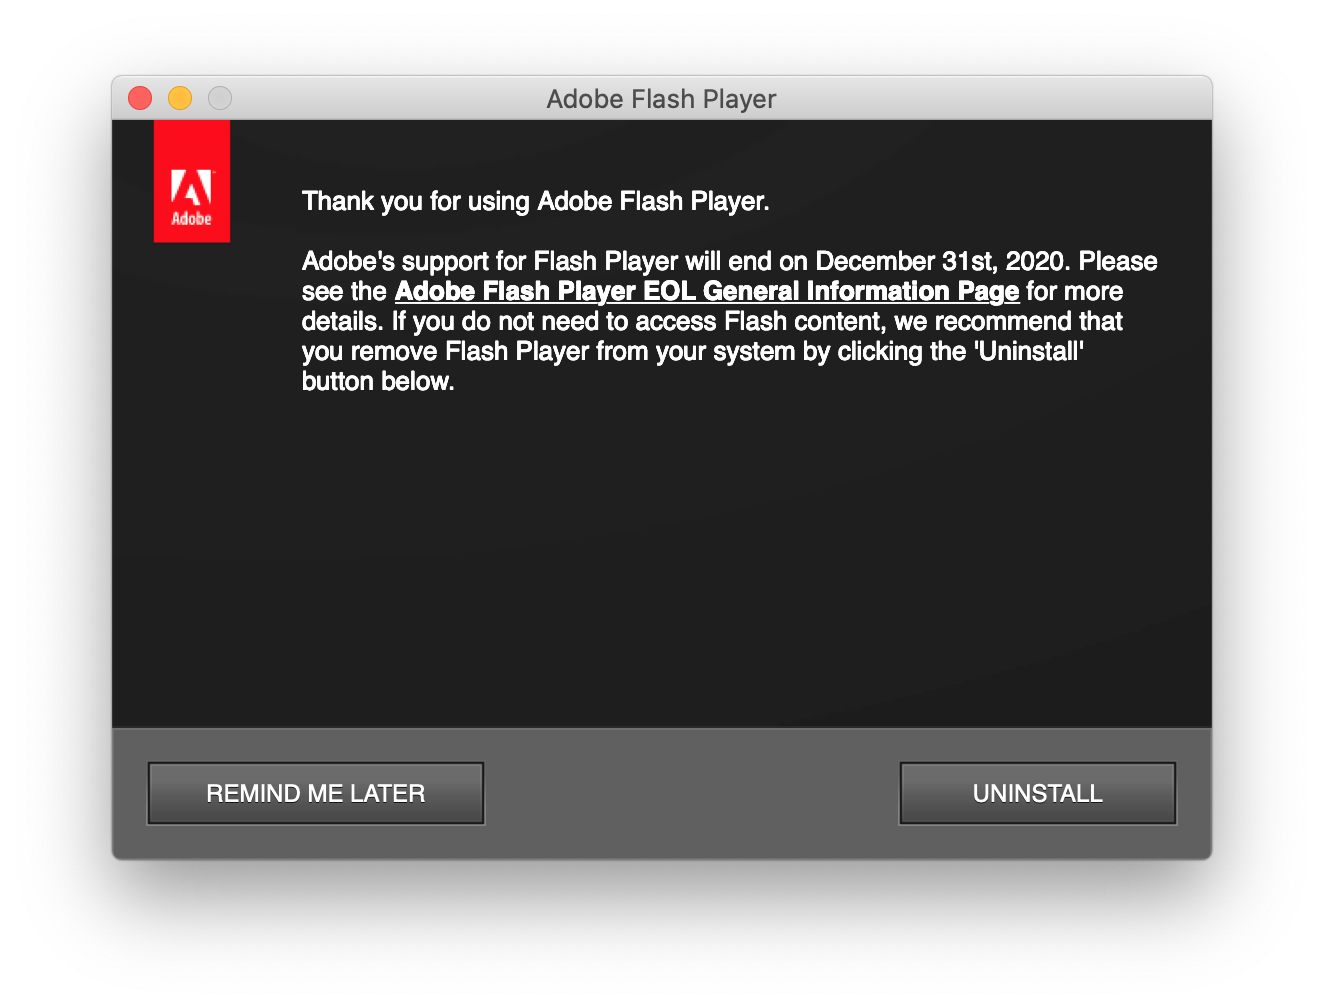 Adobe Flash Player 삭제 안내 - Thank you for using Adobe Flash Player. Adobe's support for Flash Player will end on December 31st, 2020. Please see the Adobe Flash Player EOL General Information Page for more details. If you do not need to access Flash content, we recommend that you remove Flash Player from your system by clicking the 'Uninstall' button below.